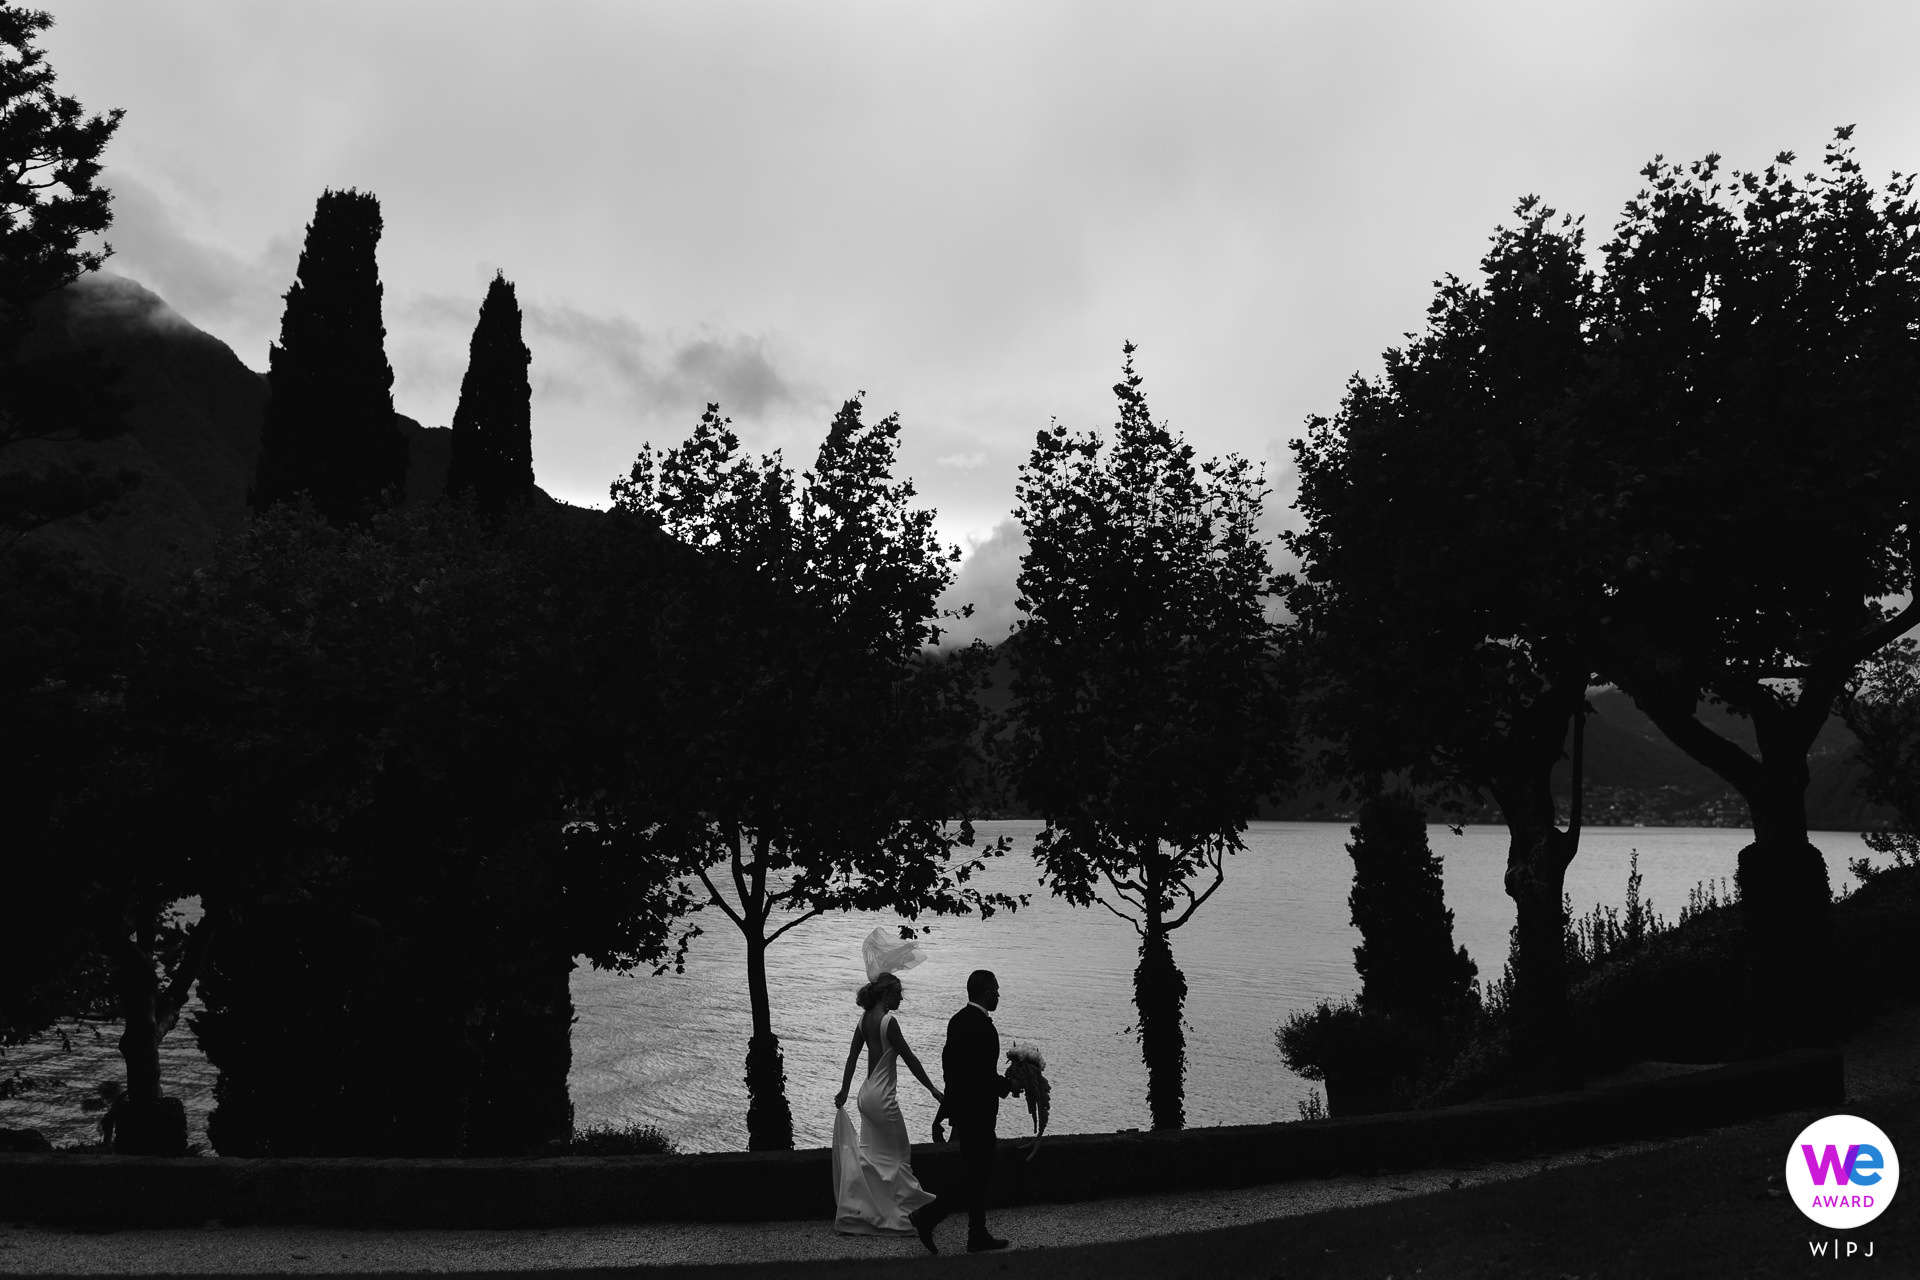 Lakeside Wedding Photography in BW at a Romantic Villa | the couple enjoyed uninterrupted views of the lake